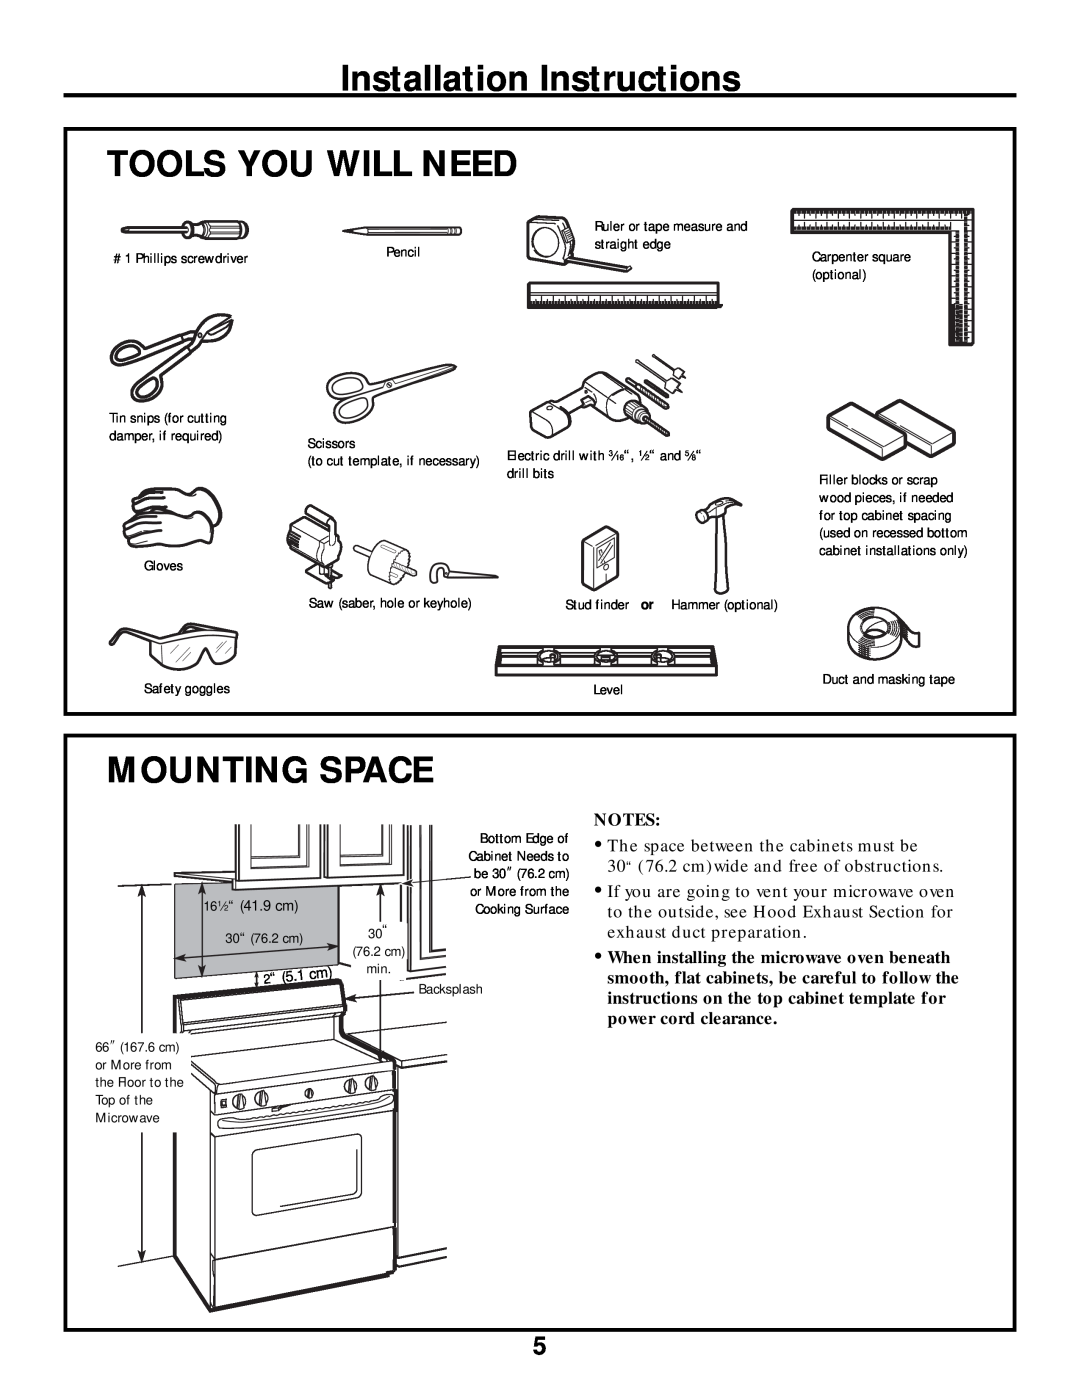 Frigidaire 316495064 warranty Installation Instructions TOOLS YOU WILL NEED, Mounting Space 